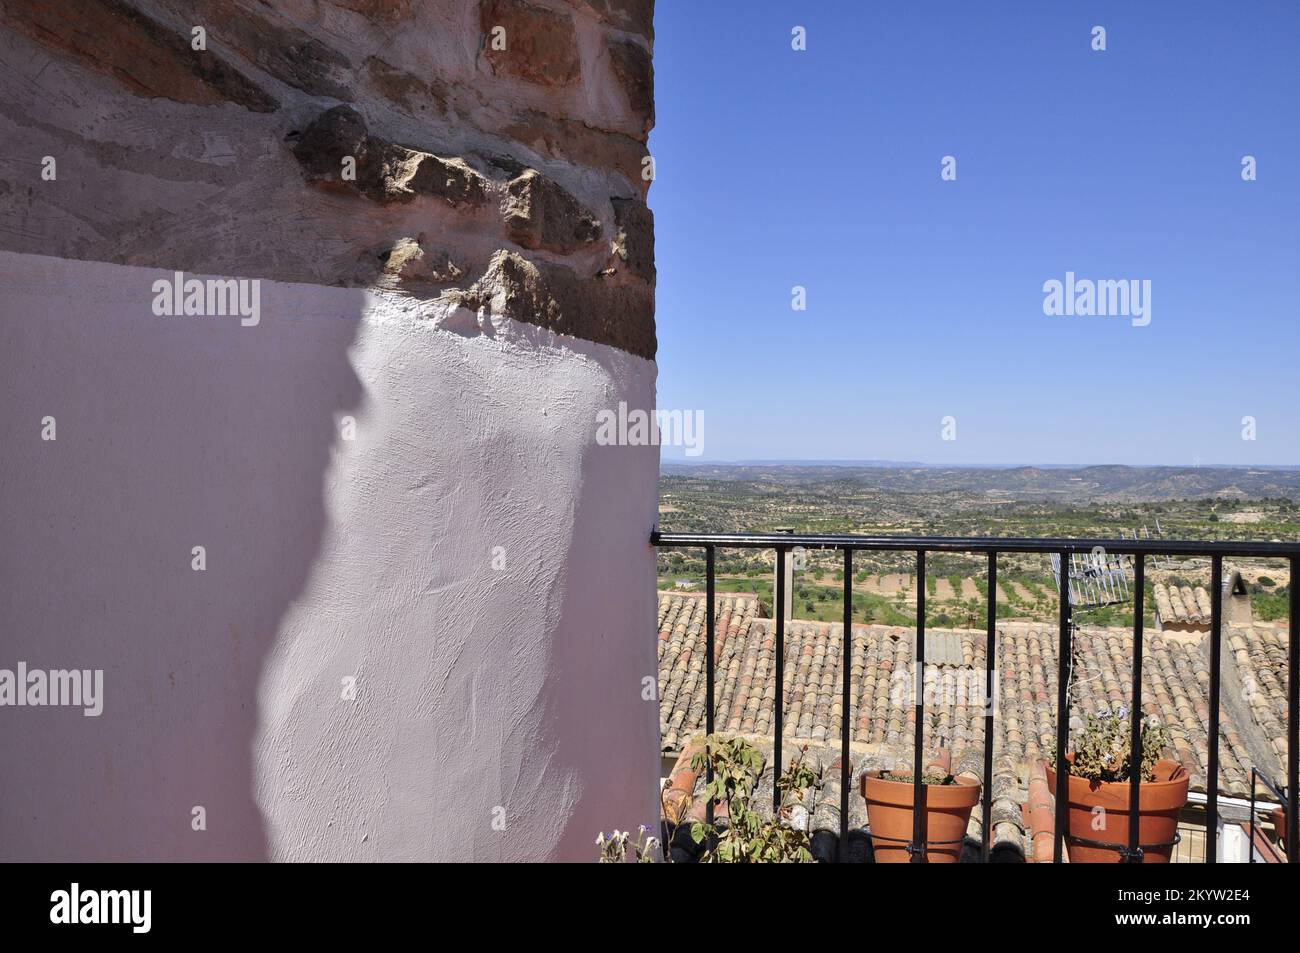 Traditional rural construction with wall whitewashed in Calaceite, Matarraña Region, Teruel, Spain Stock Photo